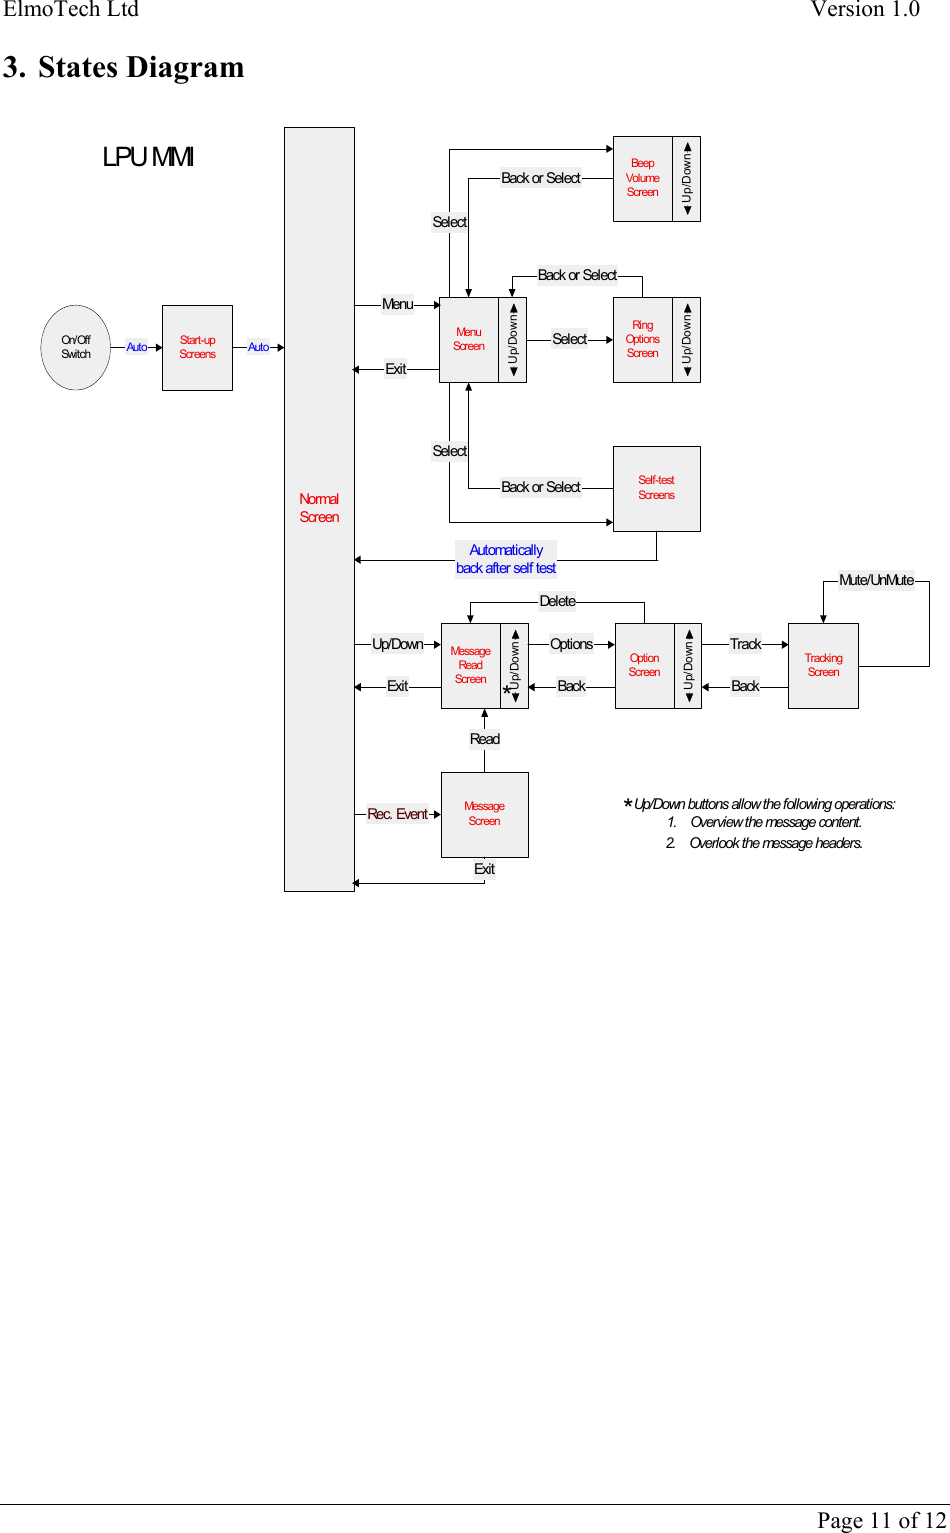 ElmoTech Ltd    Version 1.0      Page 11 of 12 3. States Diagram  On/OffSwitchStart-upScreensNormalScreenMessageScreenTrackingScreenMenuScreenMenuExi tUp/DownBeepVolumeScreenUp/DownRingOptionsScreenUp/DownAuto AutoMessageReadScreenUp/DownOpti onScreenUp/DownUp/DownExi tOptionsBackTrackBackDel eteReadMute/ UnMute LPU MMI*Up/Down buttons allow the following operations:1.    Overview the message content.2.    Overlook the message headers.*Rec. EventExitSelf-testScreensSelectBack or Sel ectSelectBack or Sel ectSelectBack or Sel ectAutomaticallyback after self test 